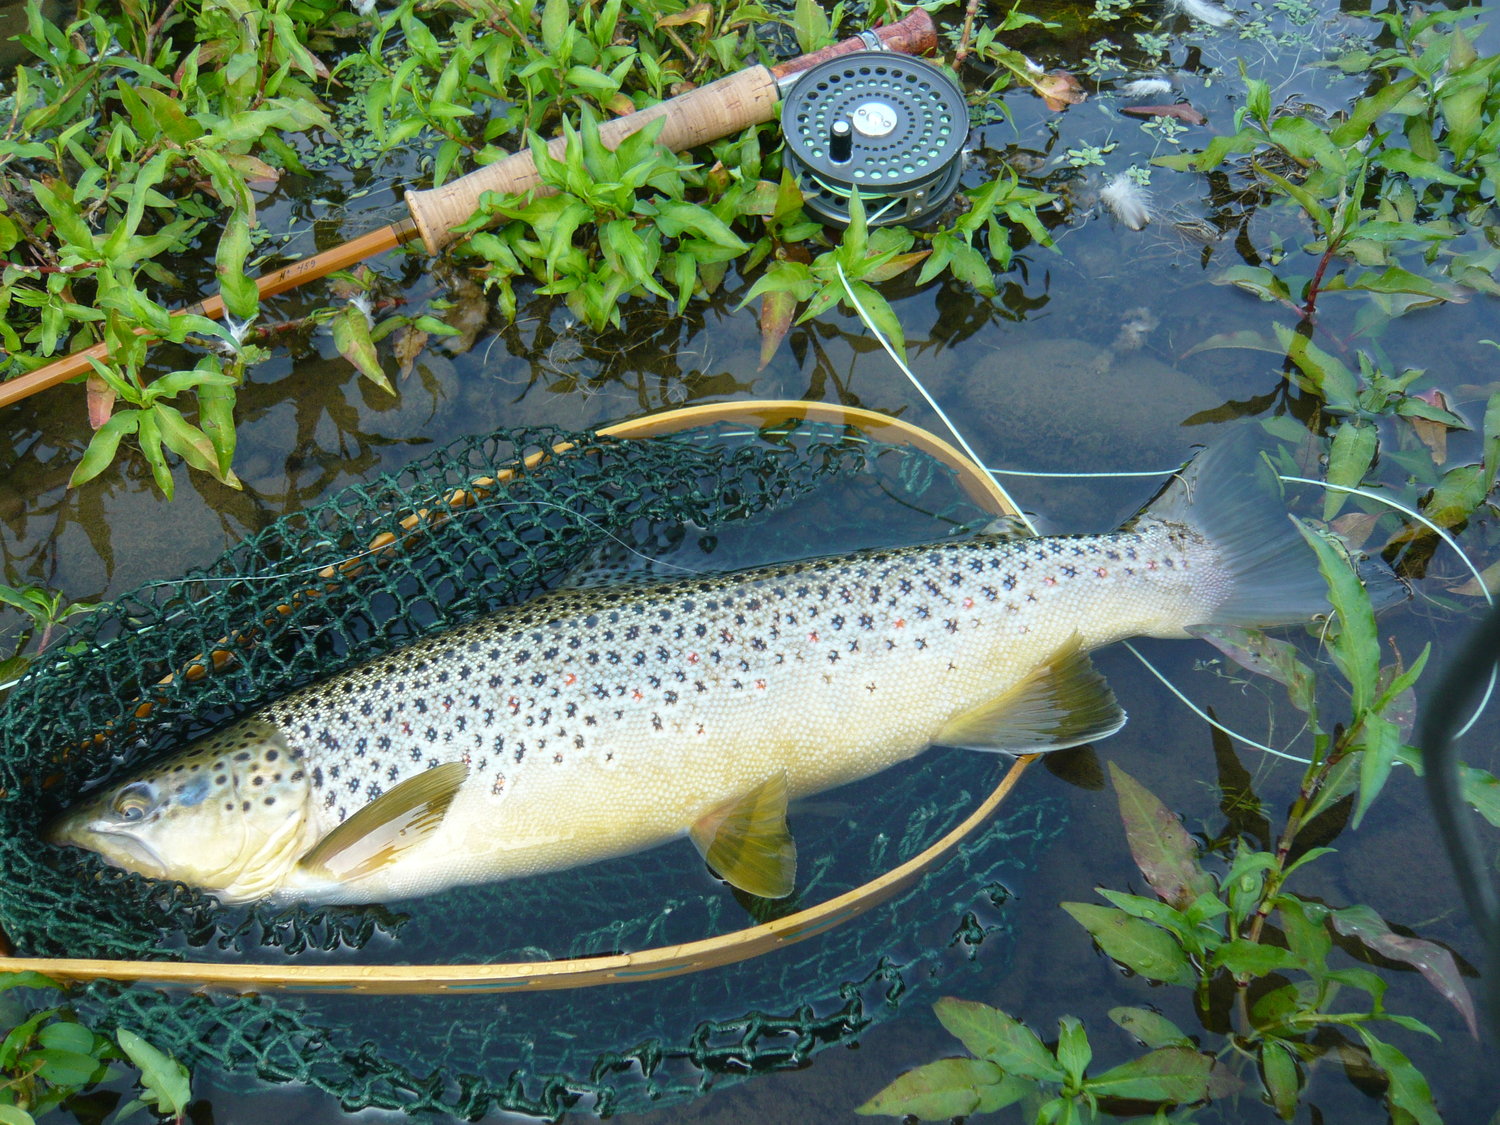 The season's first trout.